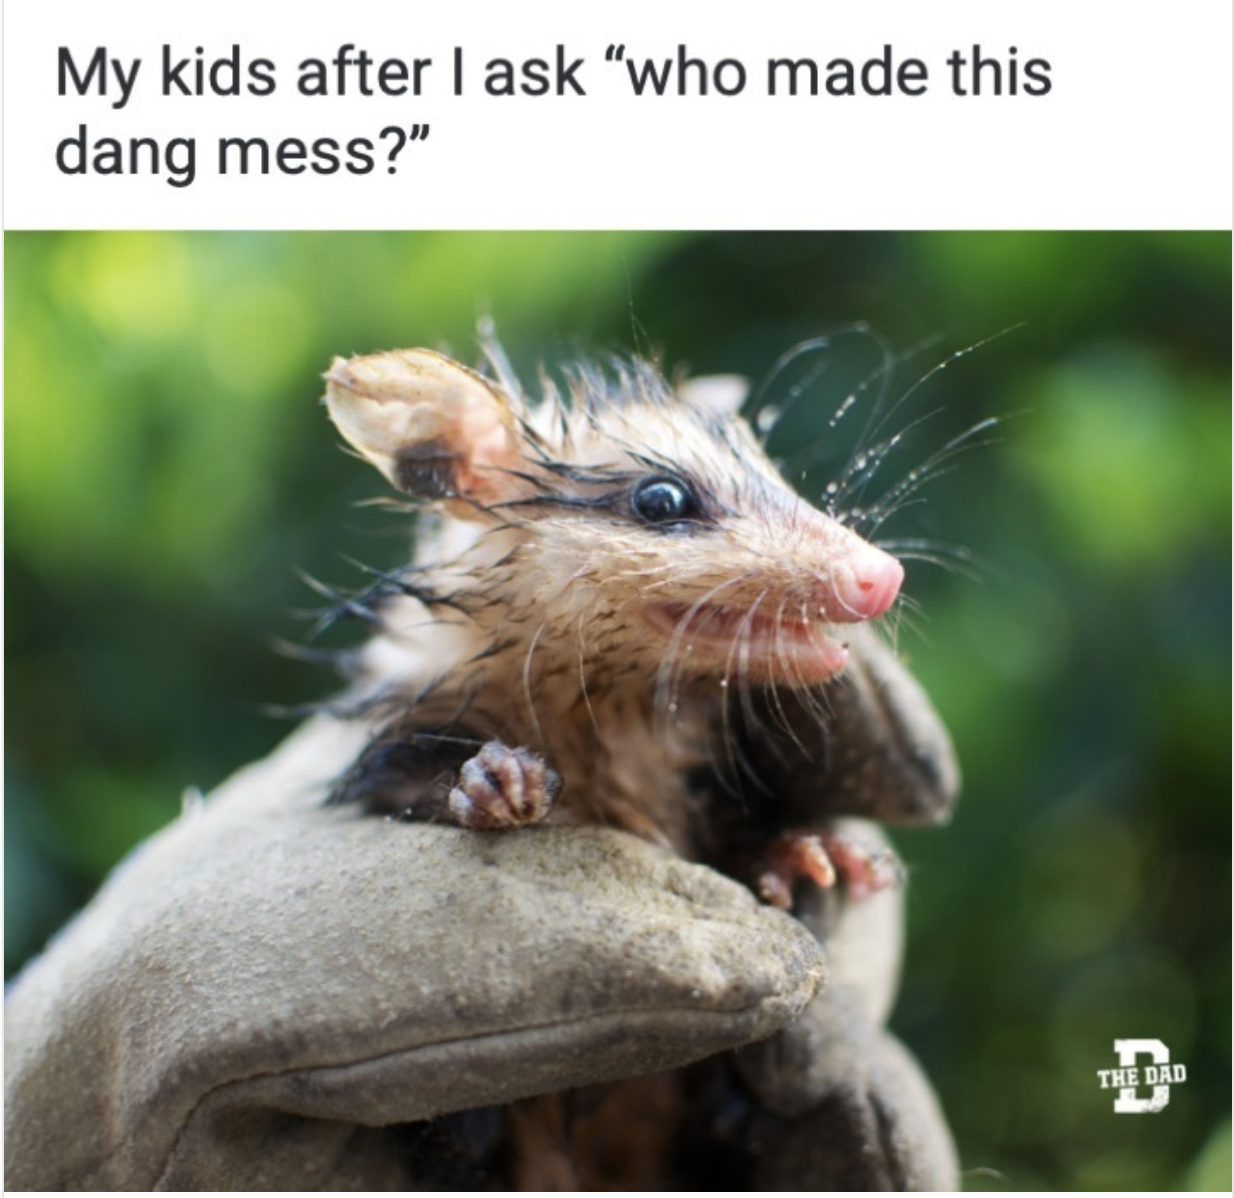 rat - My kids after I ask "who made this dang mess?" The Dad